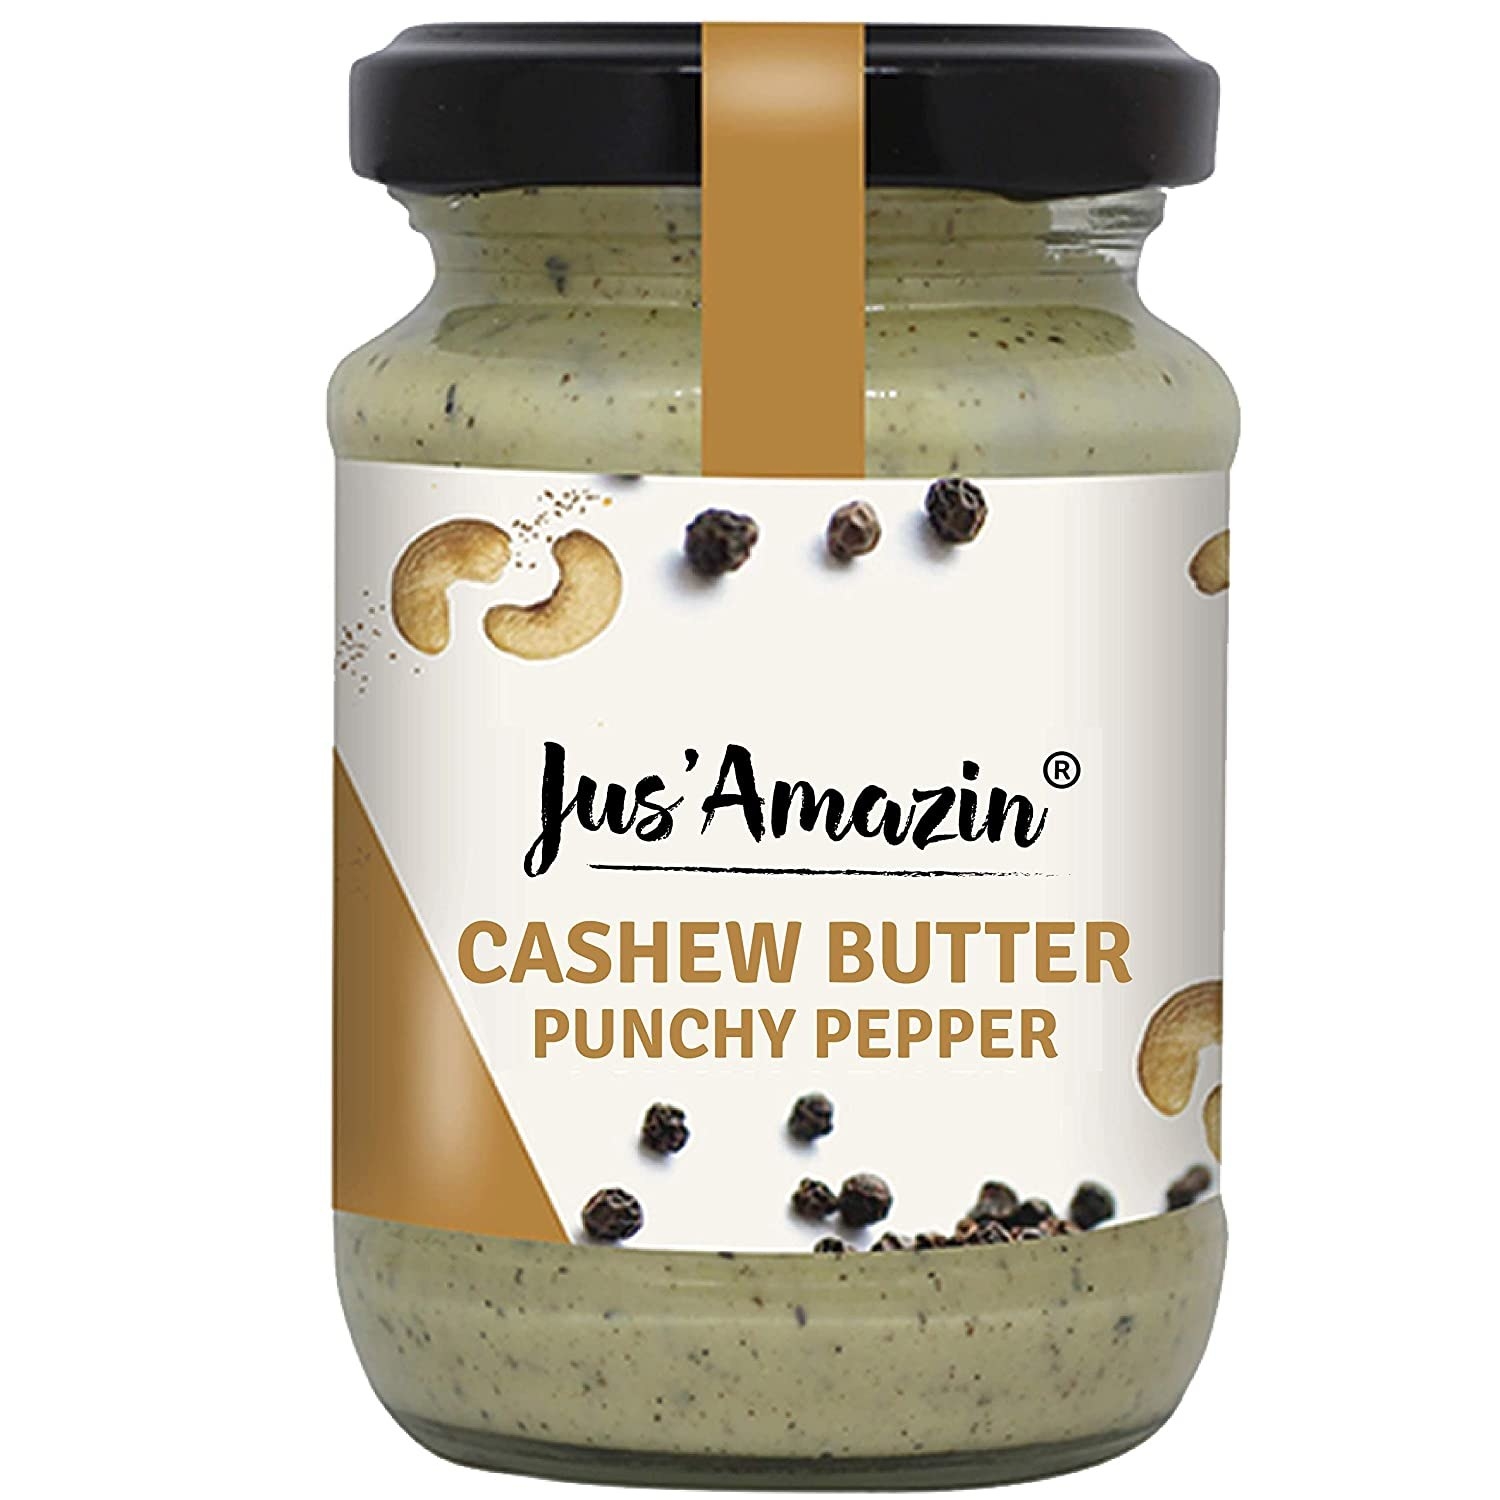 Packaging of the cashew spread